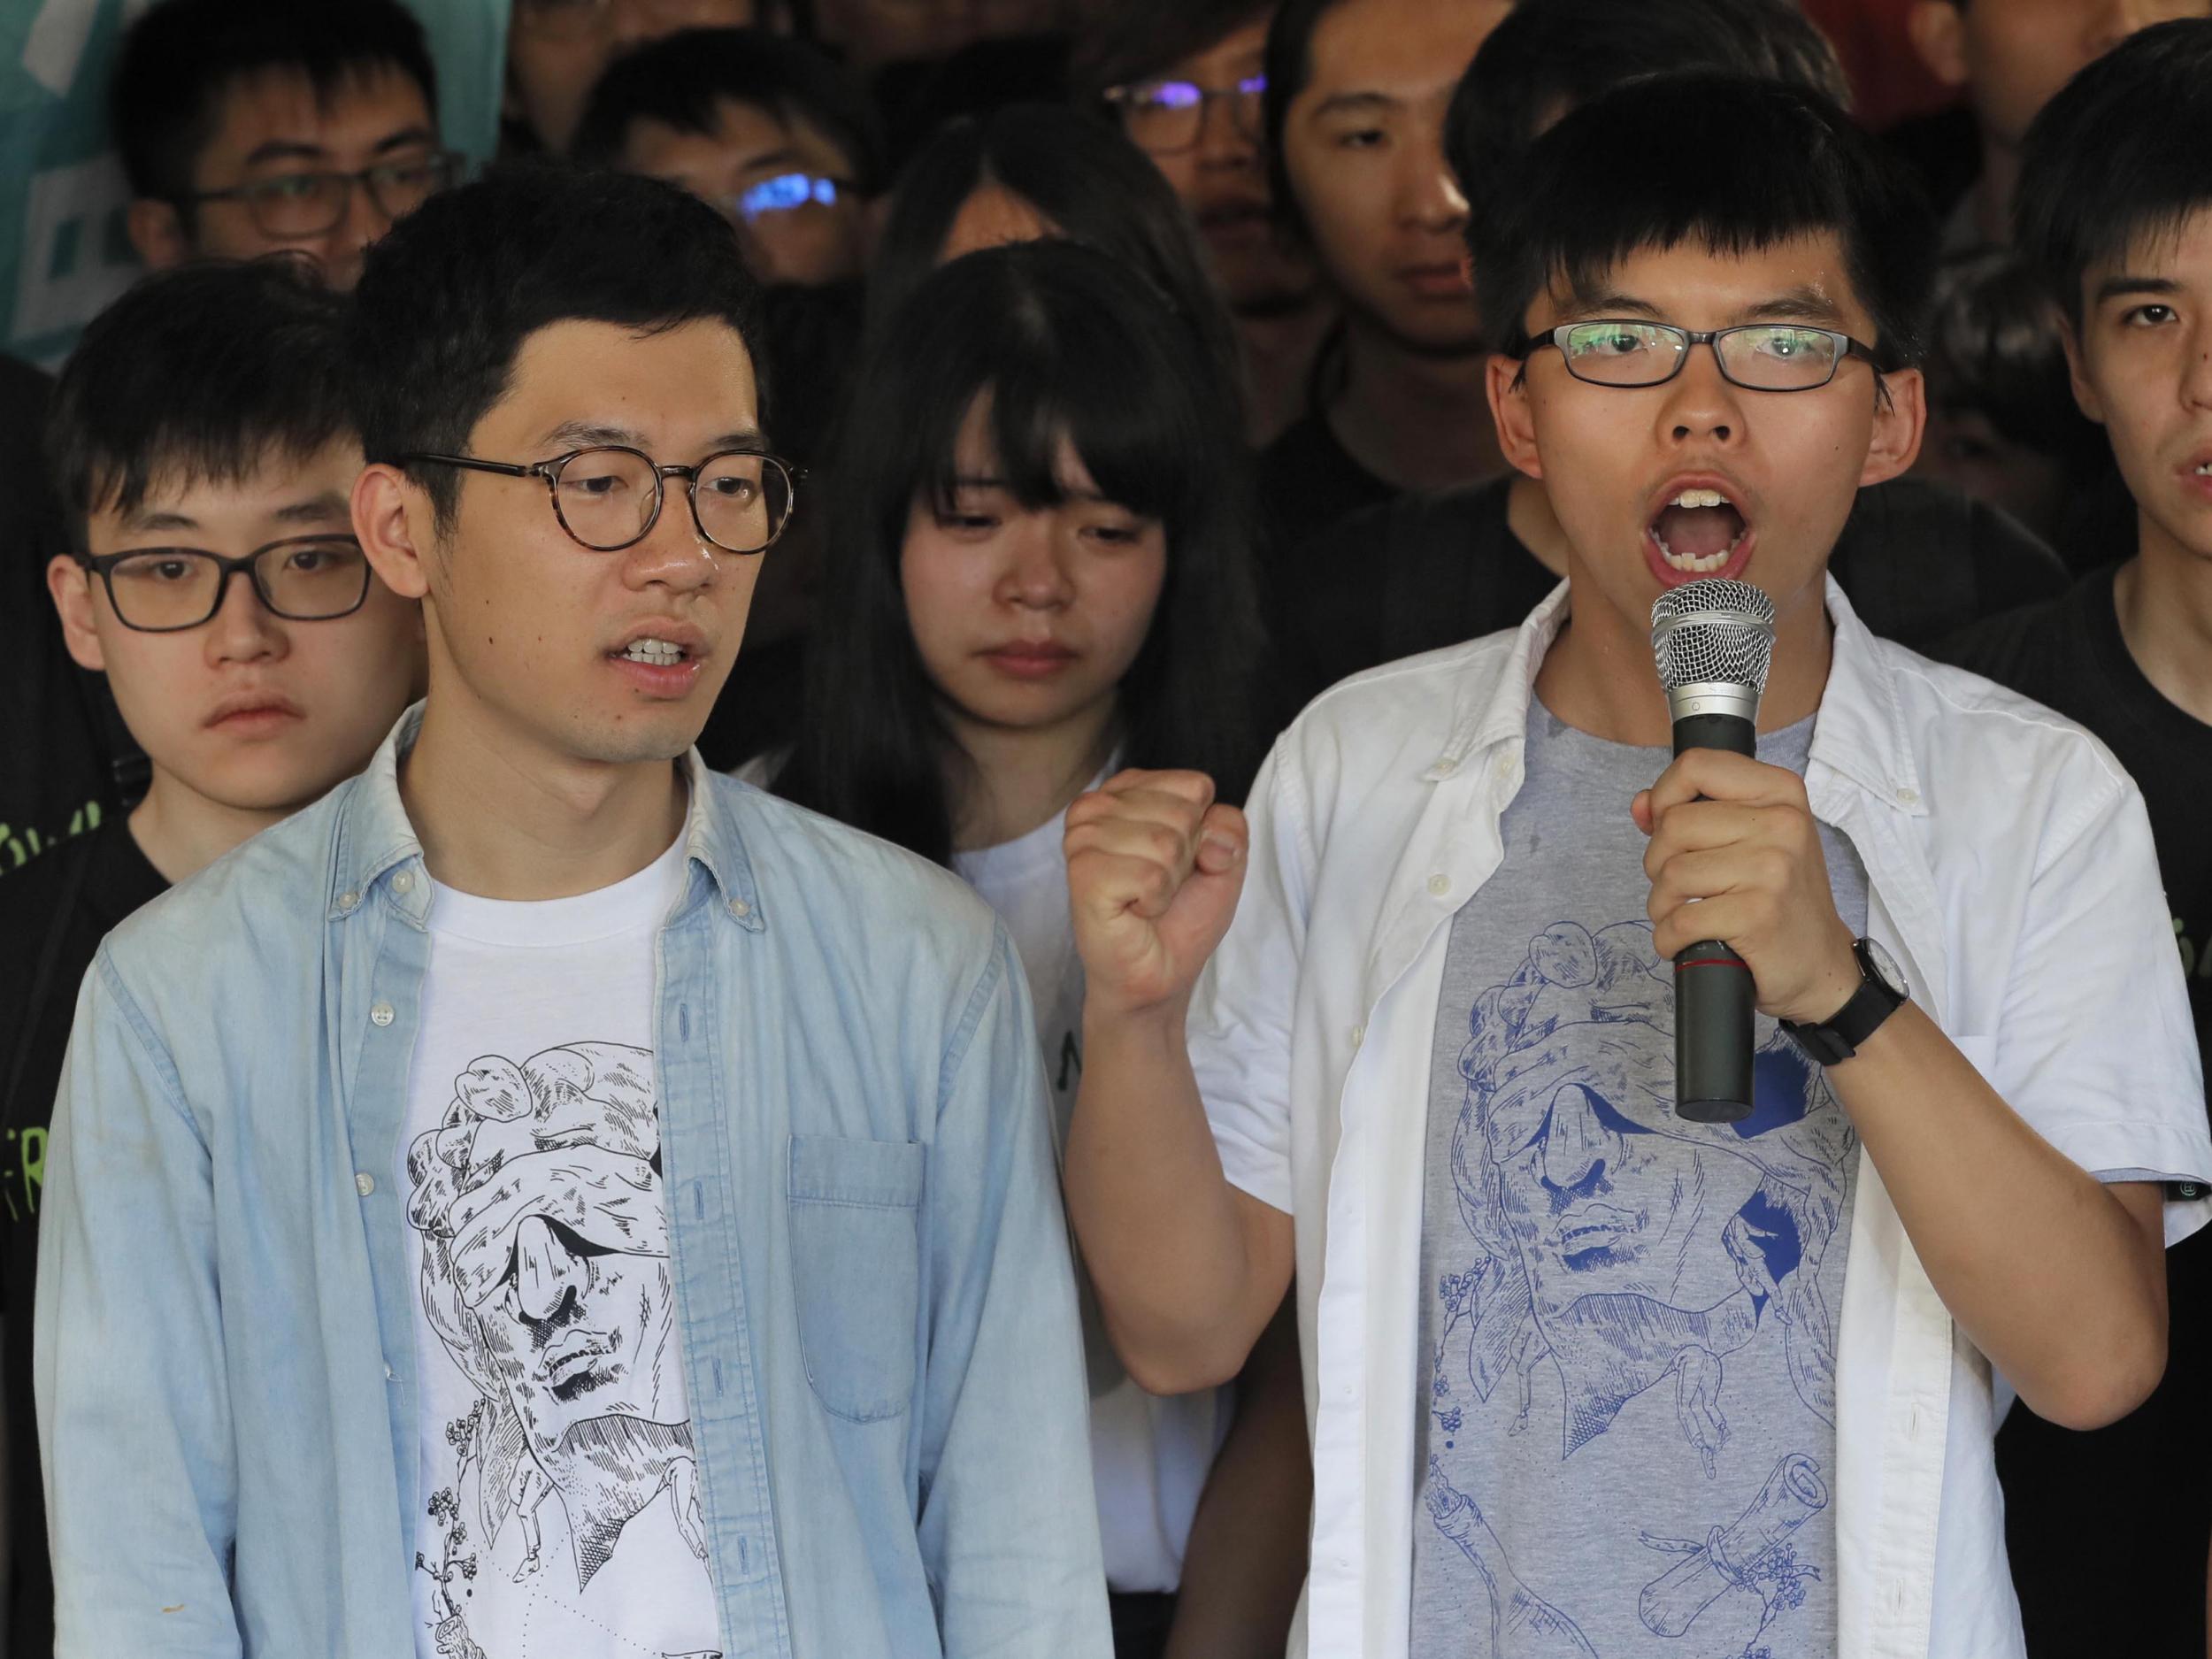 Hong Kong activists Joshua Wong, right, and Nathan Law, left, speak outside the high court before a ruling on a prosecution request for stiffer sentences following a lower court decision that let them avoid prison in Hong Kong o 17 August 2017